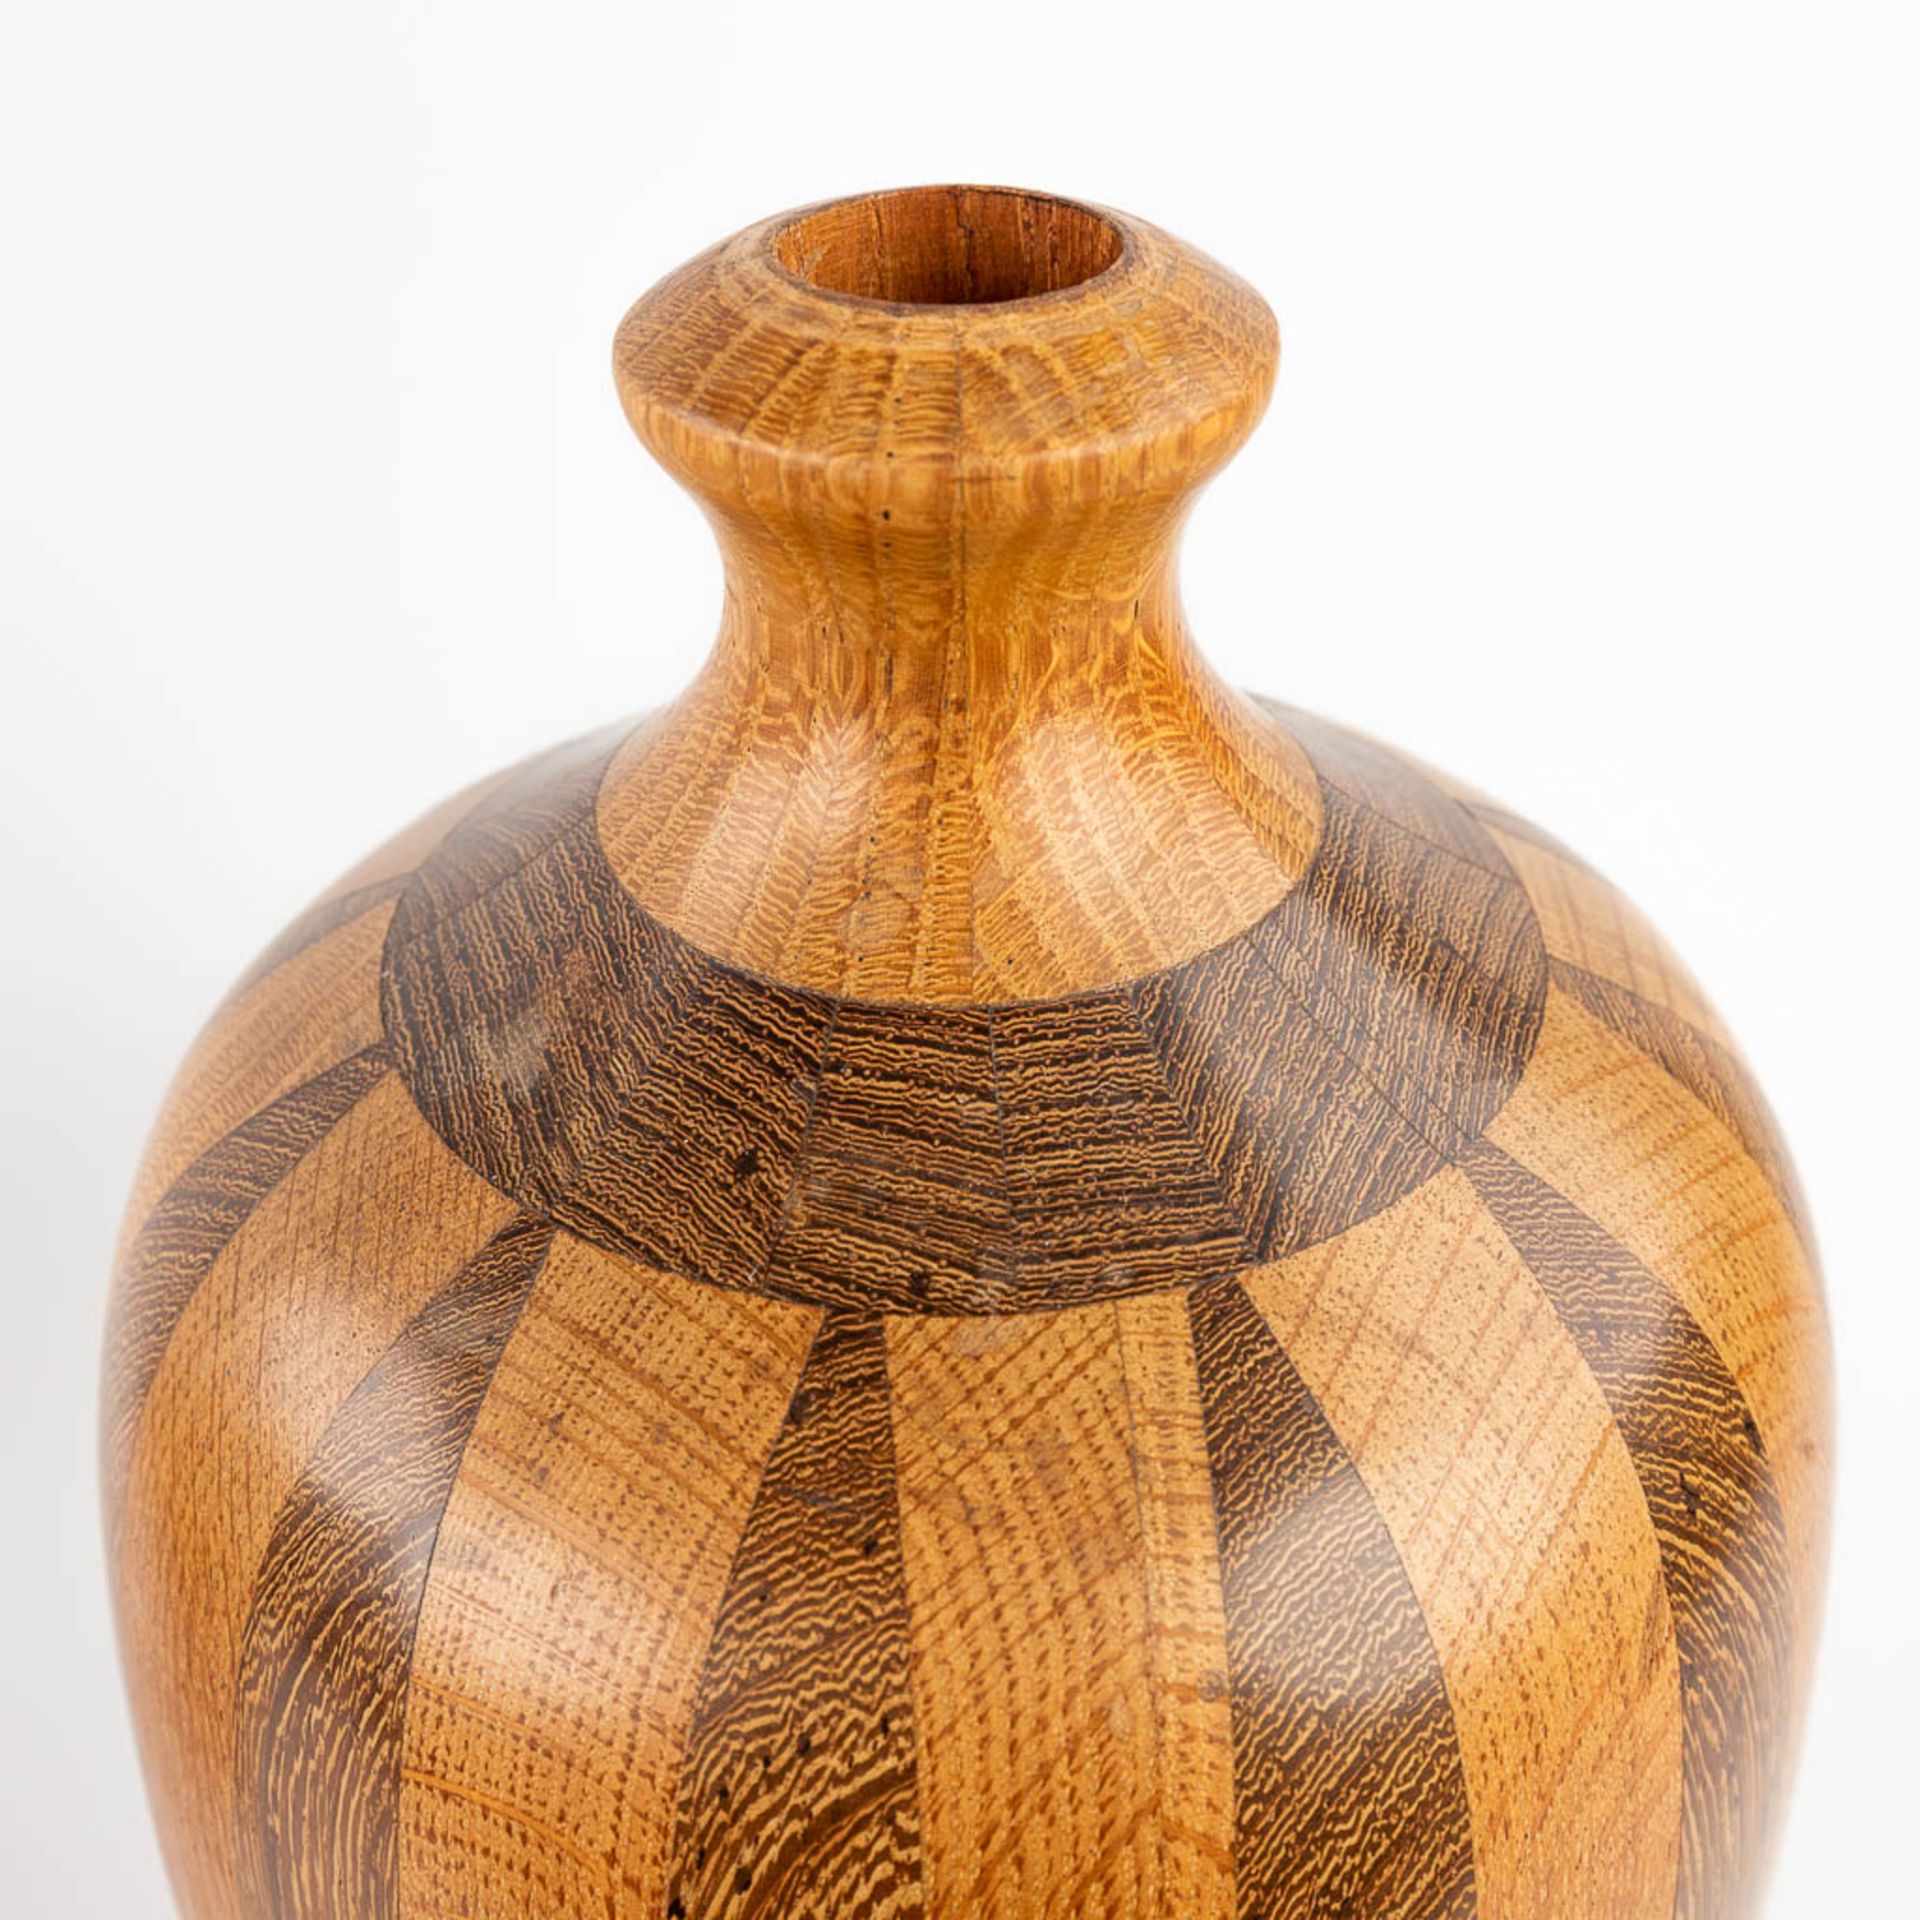 A collection of 2 wood-turned vases, made of wood. circa 1960. (H: 43 x D: 16 cm) - Image 11 of 11